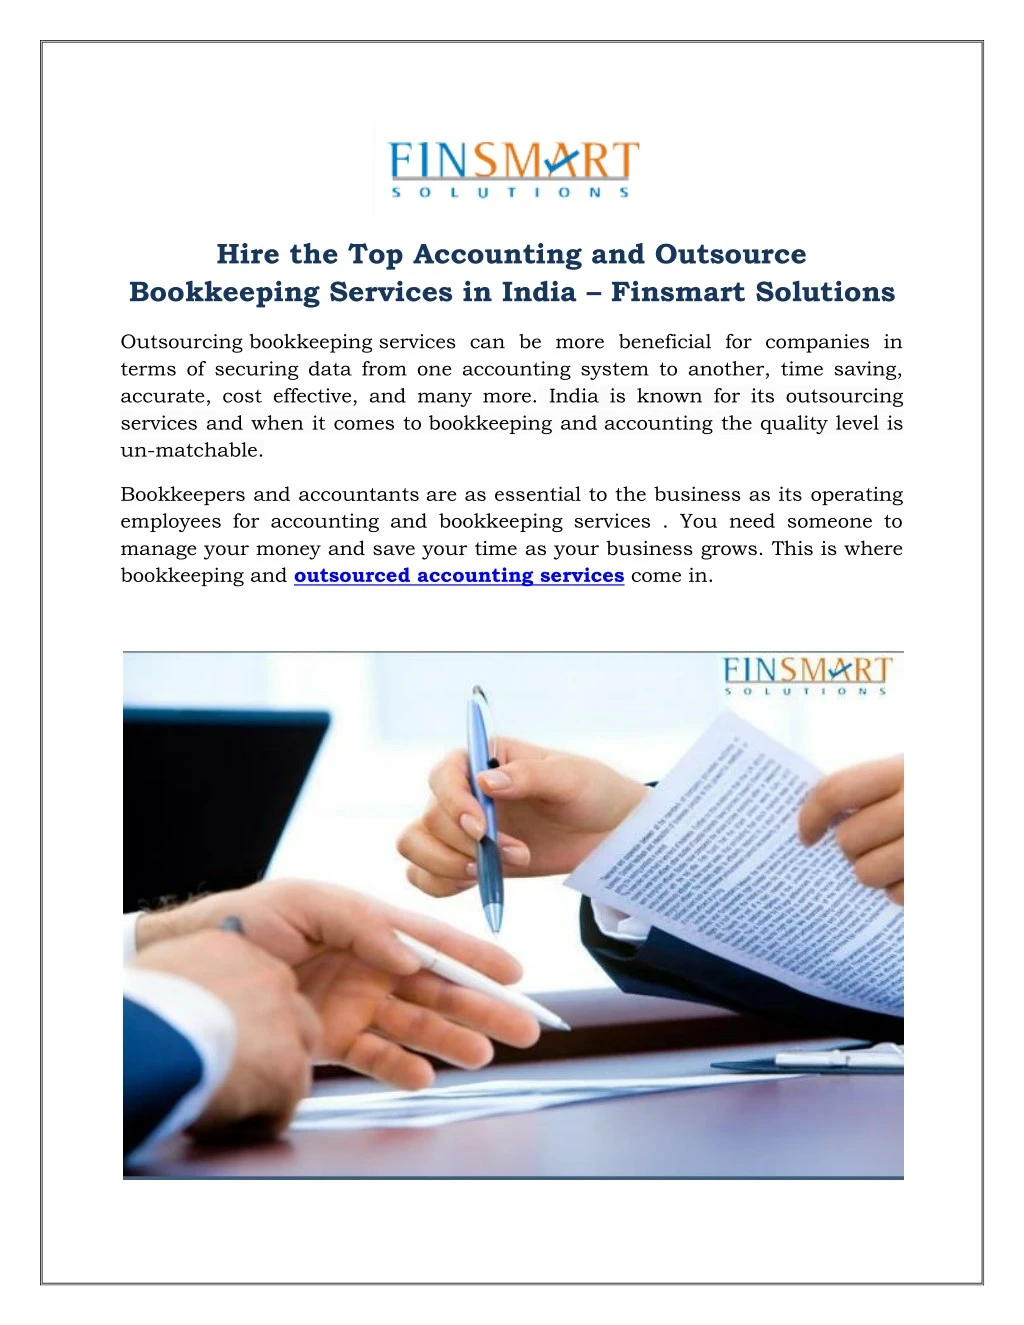 hire the top accounting and outsource bookkeeping